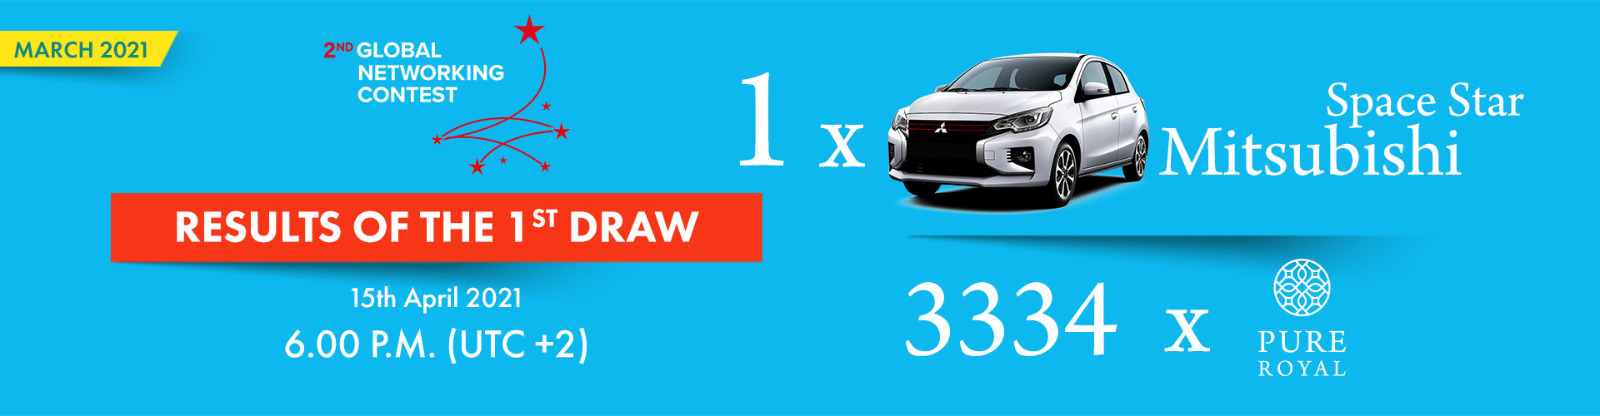 WIN THE CAR OF YOUR DREAMS!